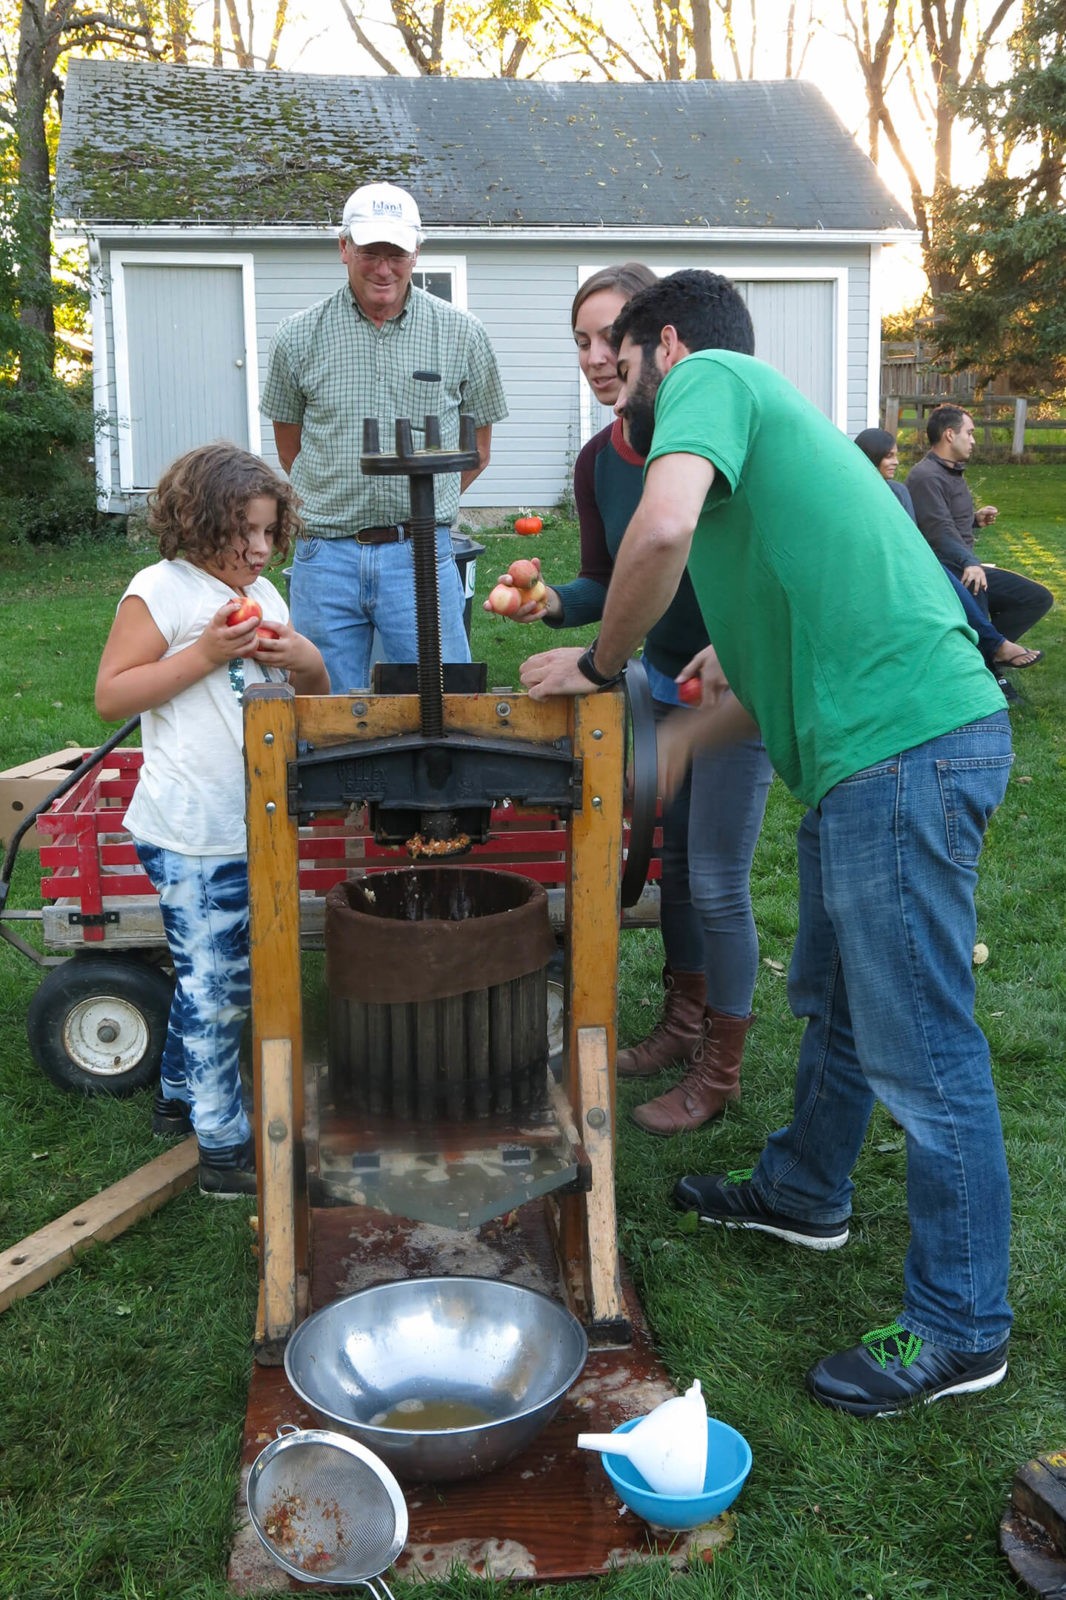 Robin Botie of Ithaca, New York, photographs an apple cider pressing party.